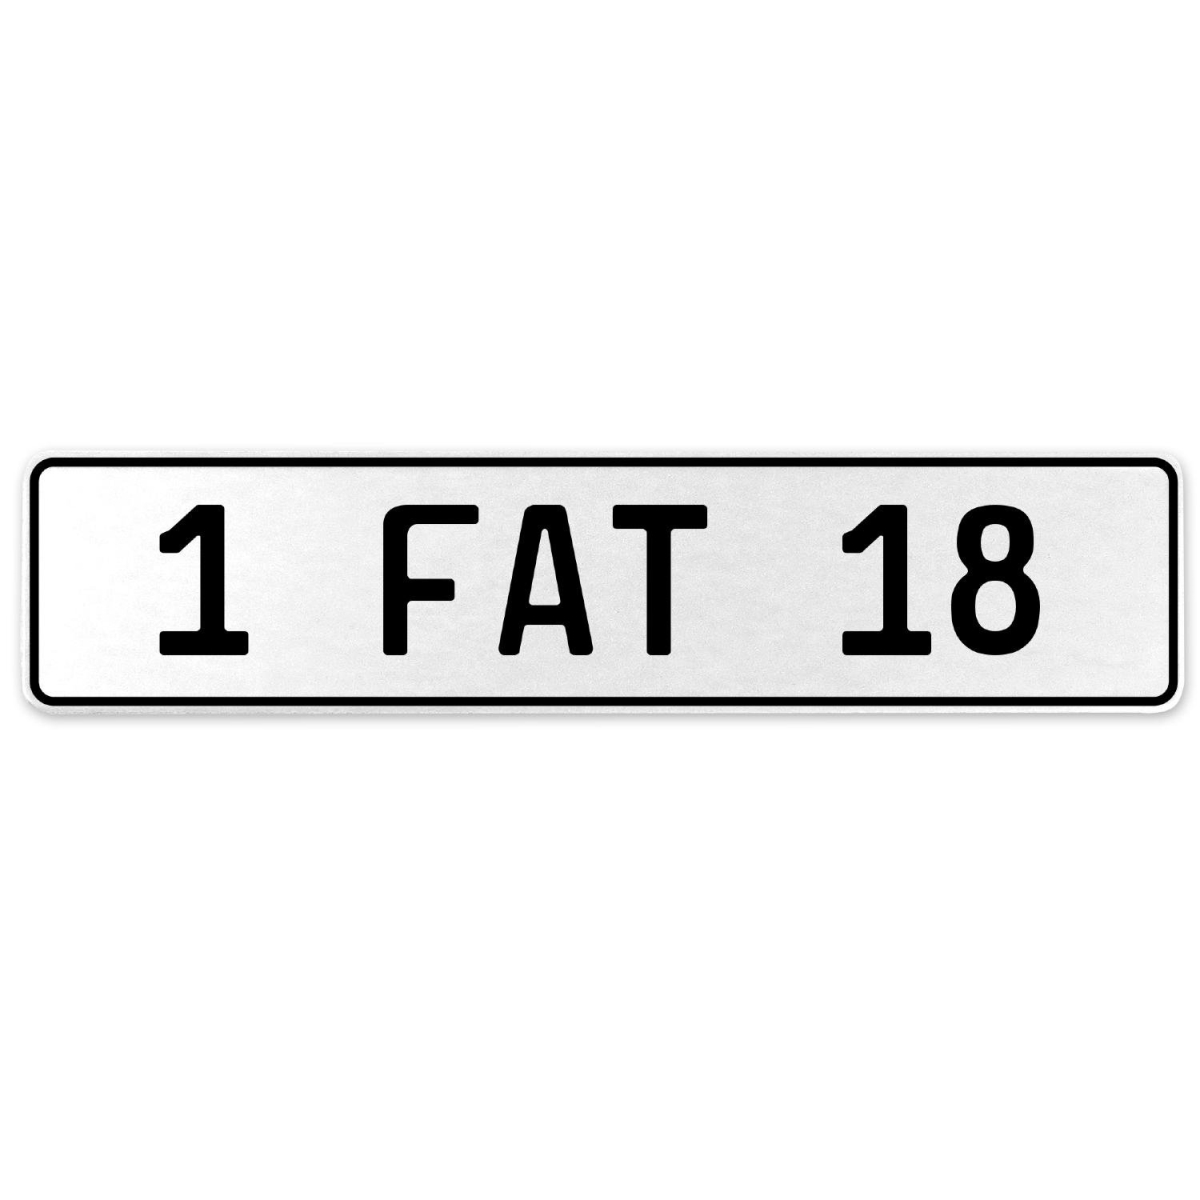 554615 1 Fat 18 - White Aluminum Street Sign Mancave Euro Plate Name Door Sign Wall